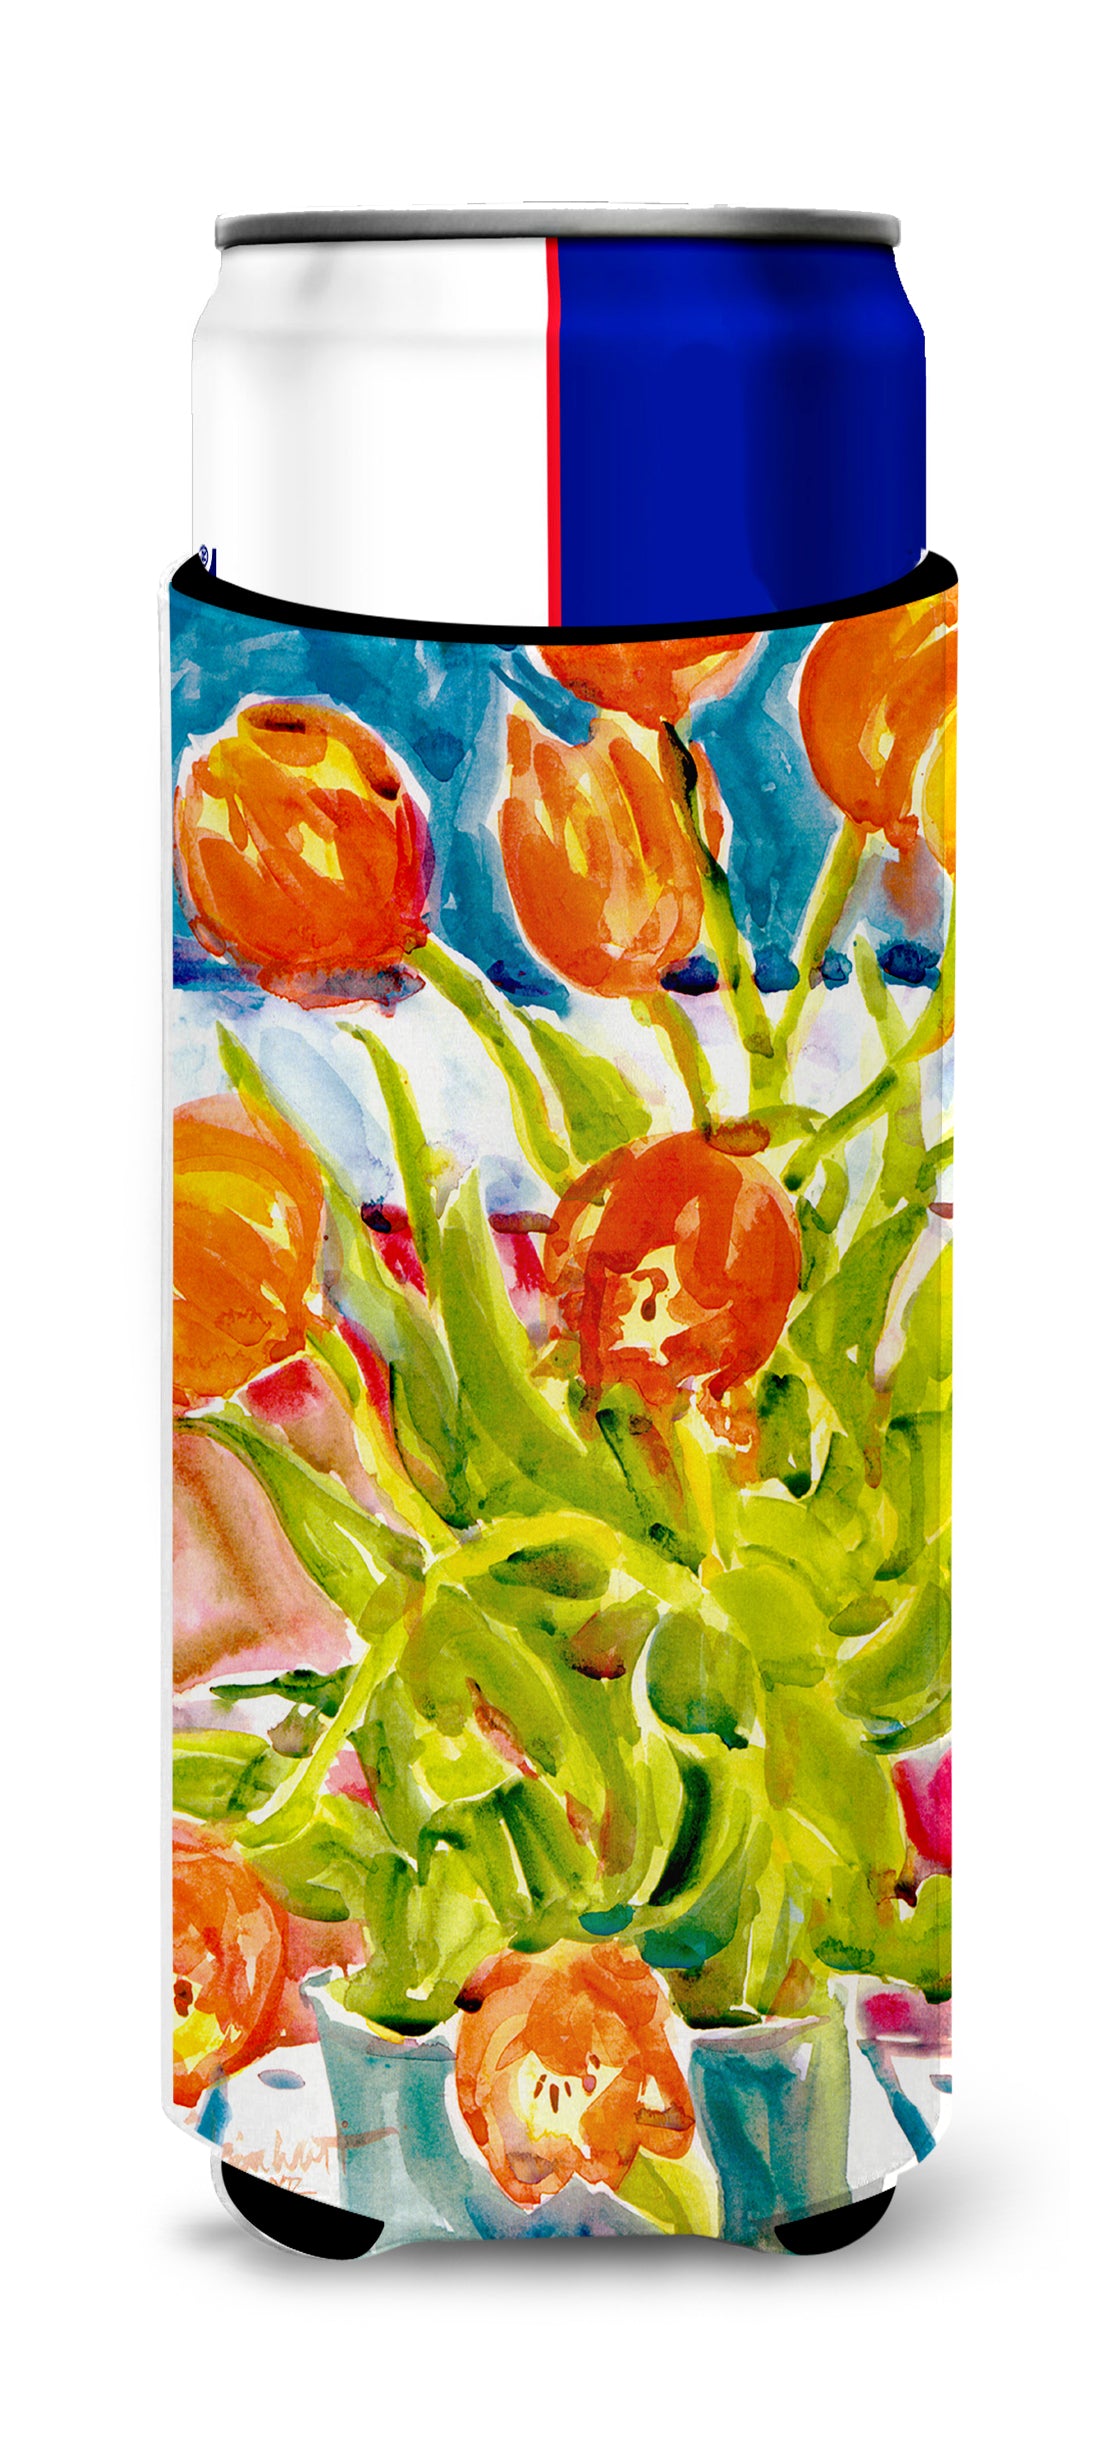 Flowers - Tulips Ultra Beverage Insulators for slim cans 6025MUK